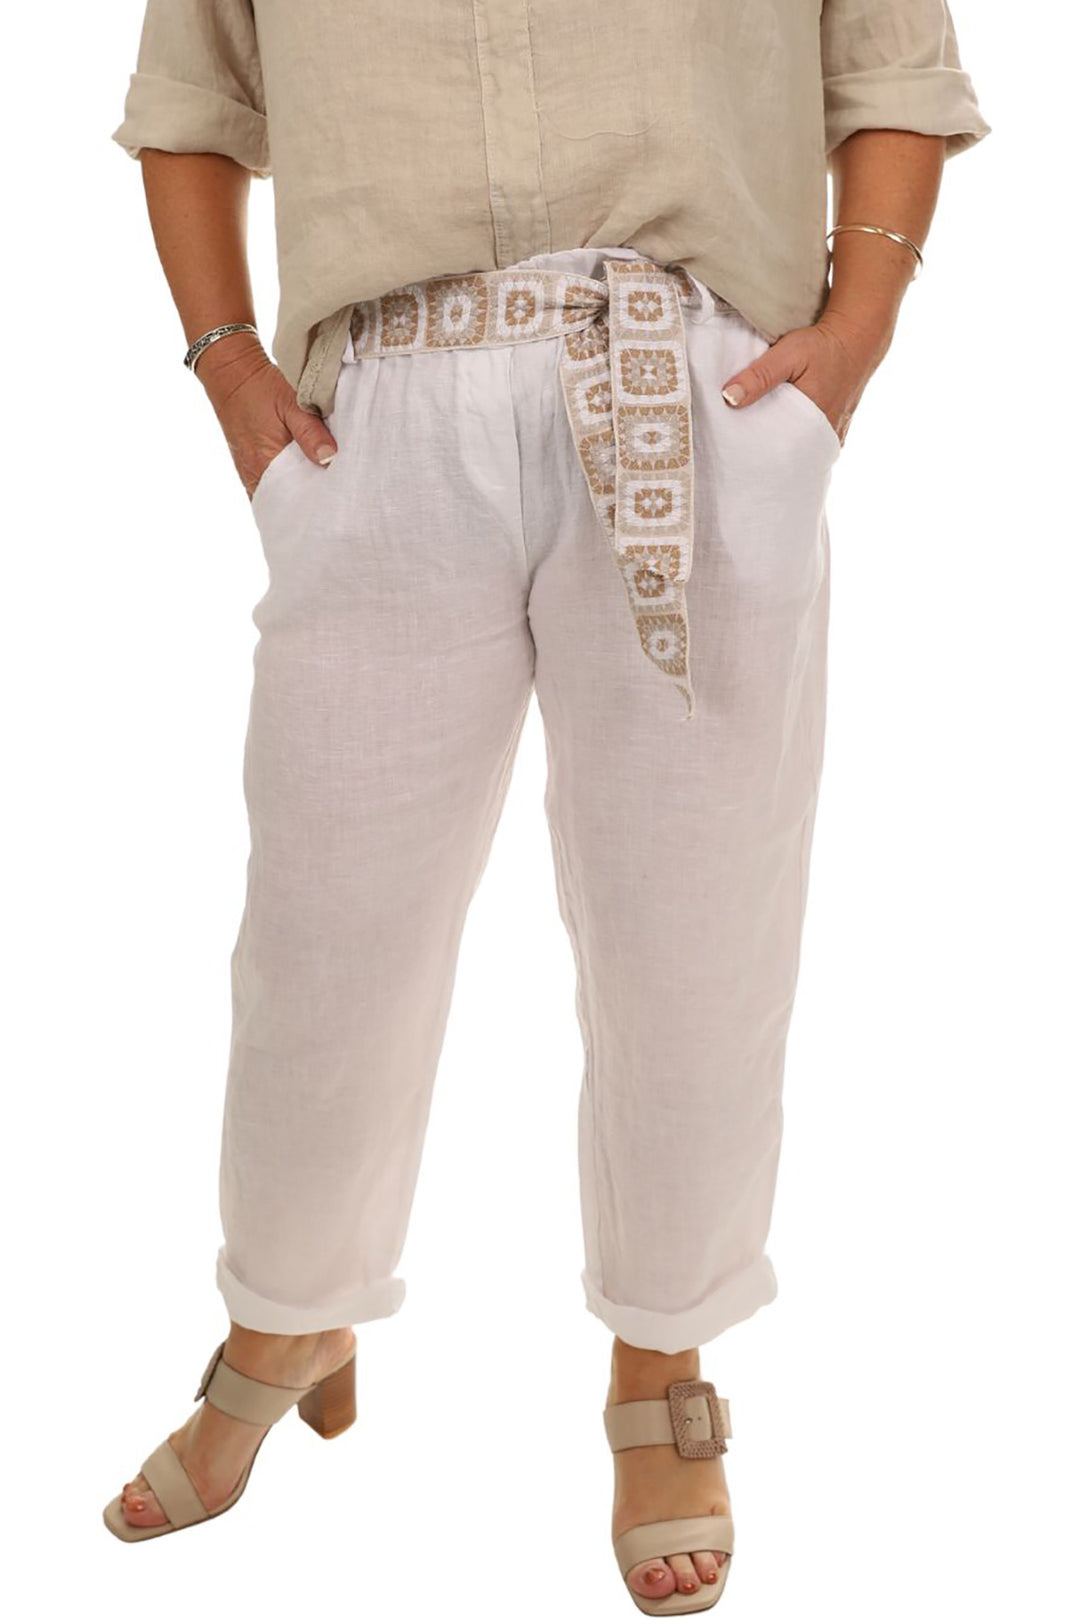 Woman wearing the Arlyn pant in white by Cindy-G, sold and shipped from Pizazz Boutique Nelson Bay women's dresses online Australia